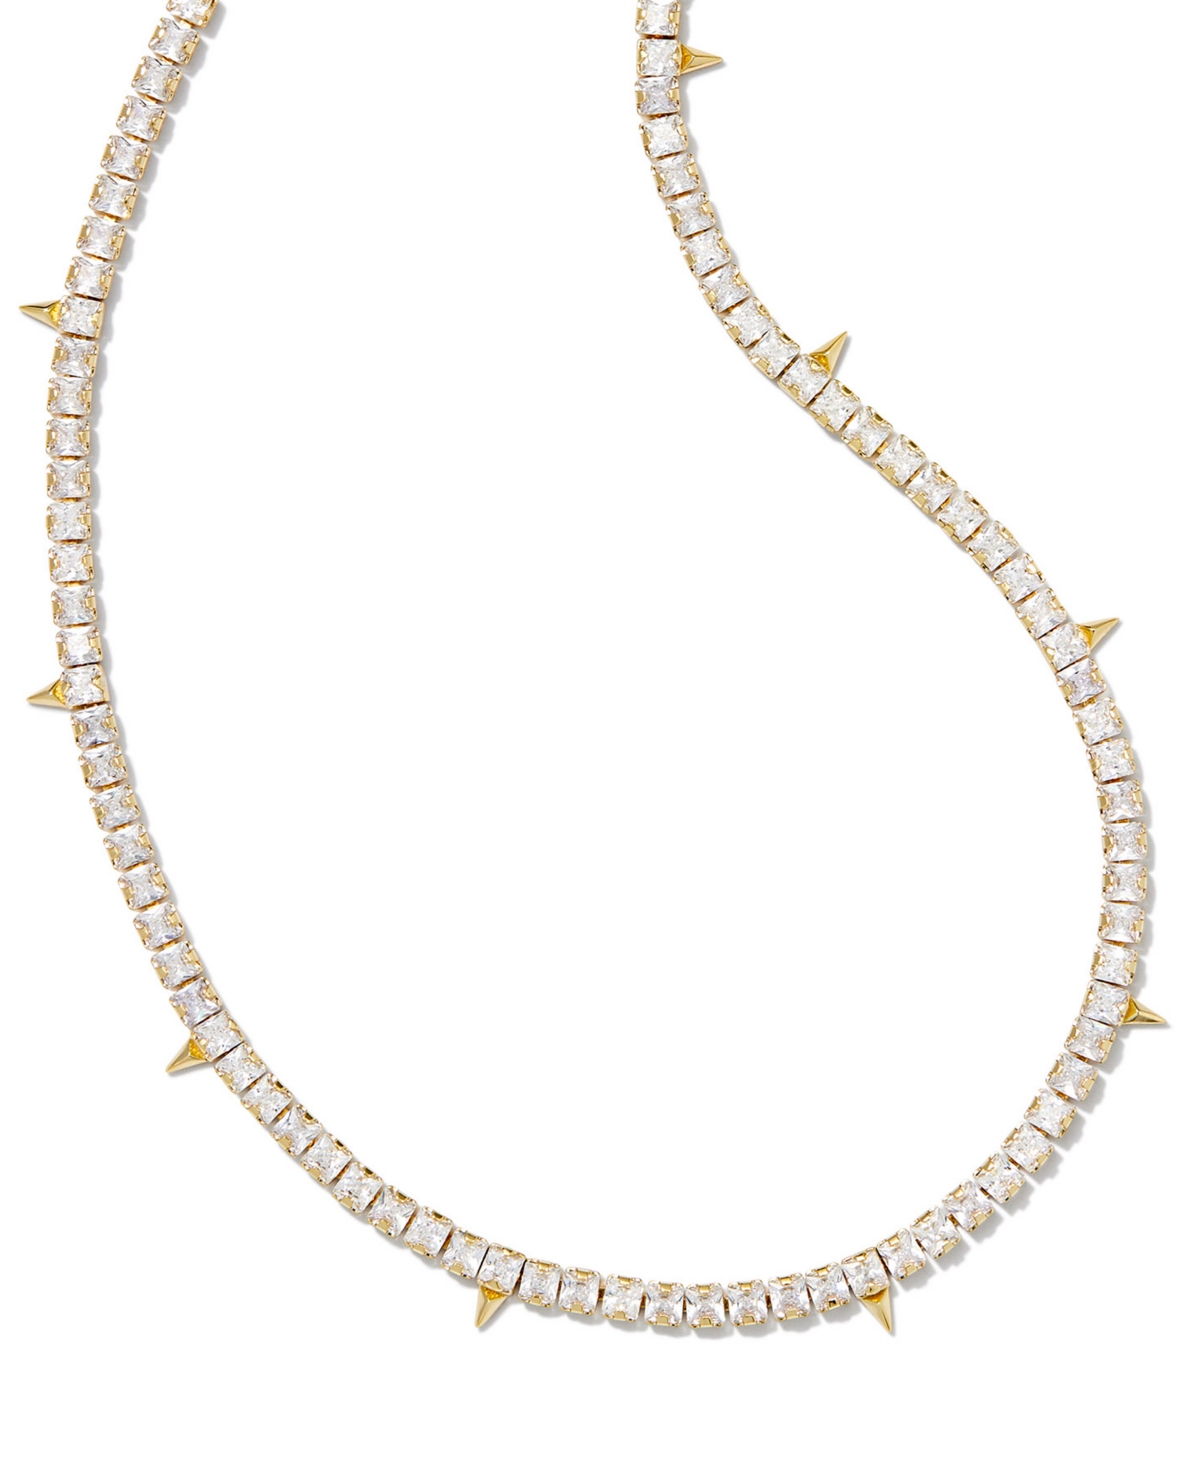 Kendra Scott 14k Gold-plated Spike Cubic Zirconia 17" Adjustable Tennis Necklace In White Crystal